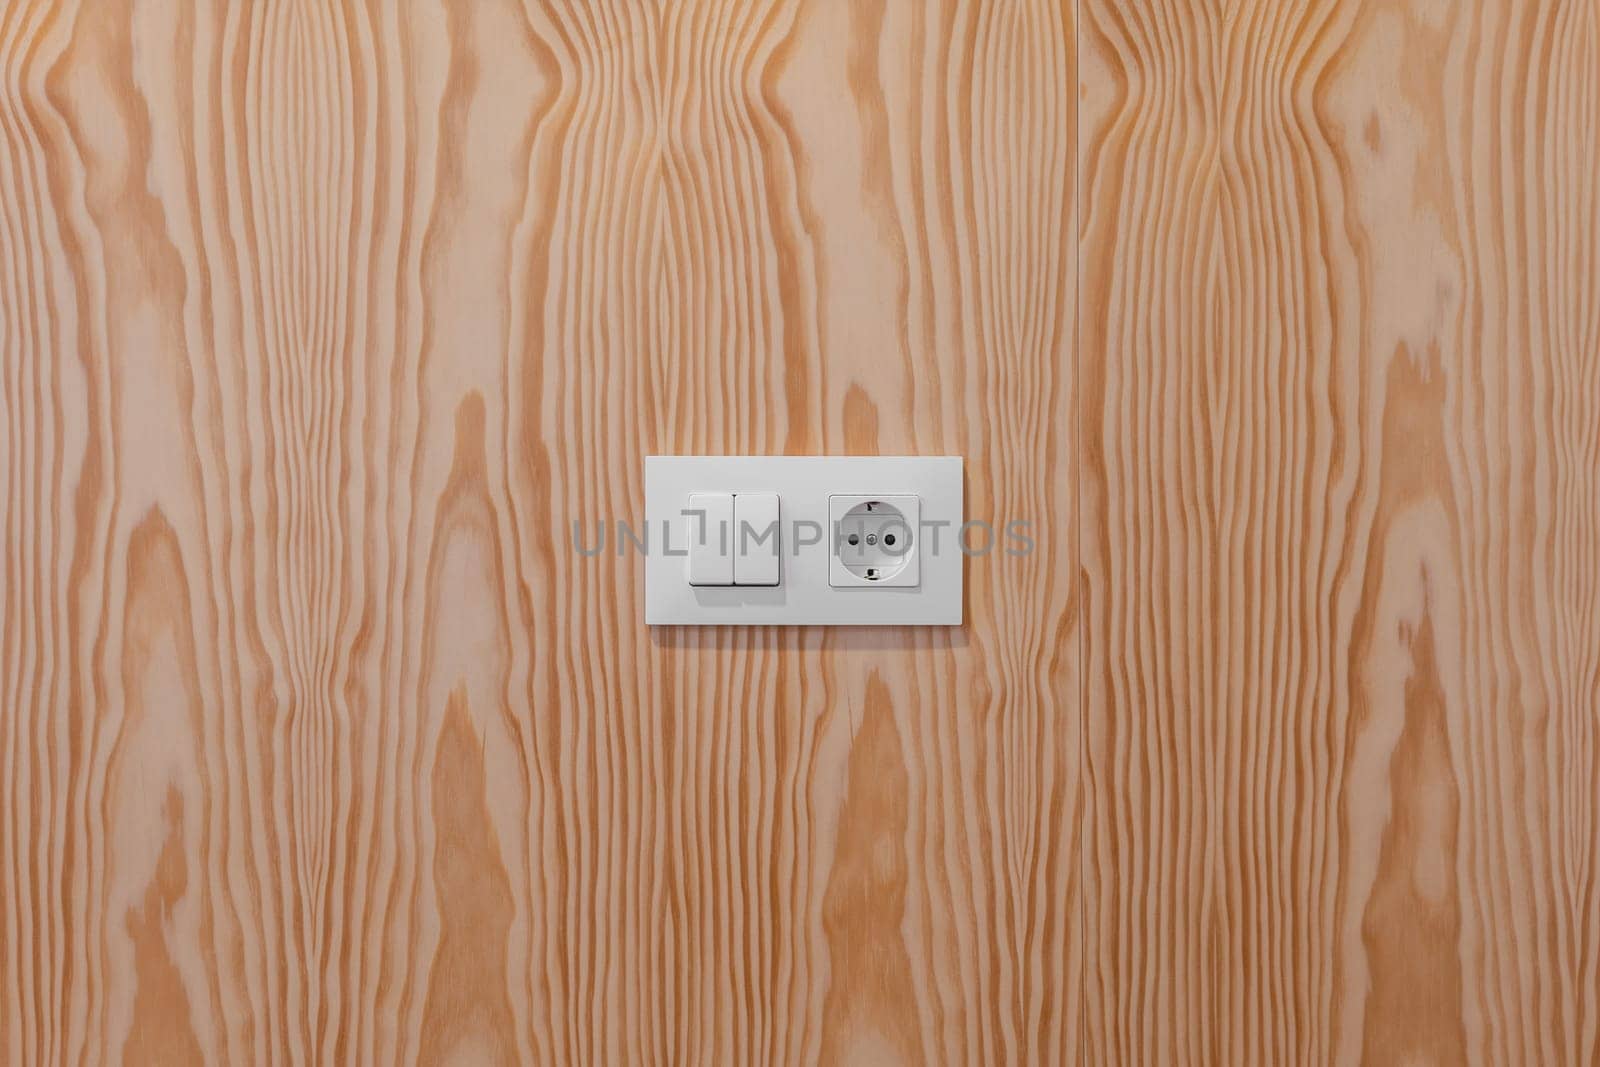 Minimalistic light switch and power outlet on a textured wooden wall by apavlin